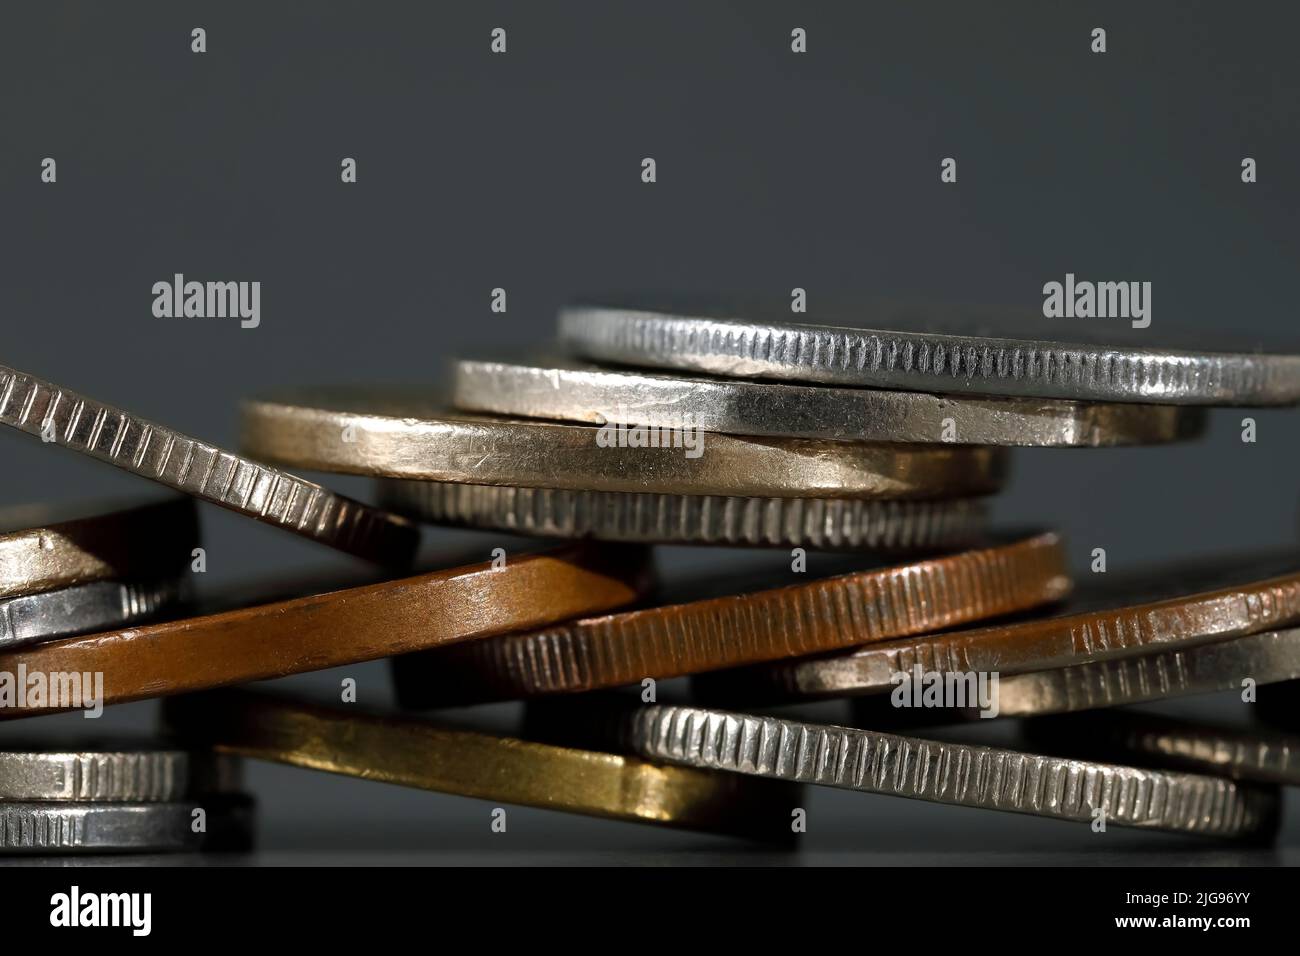 These are different coins arranged against gray background. Stock Photo